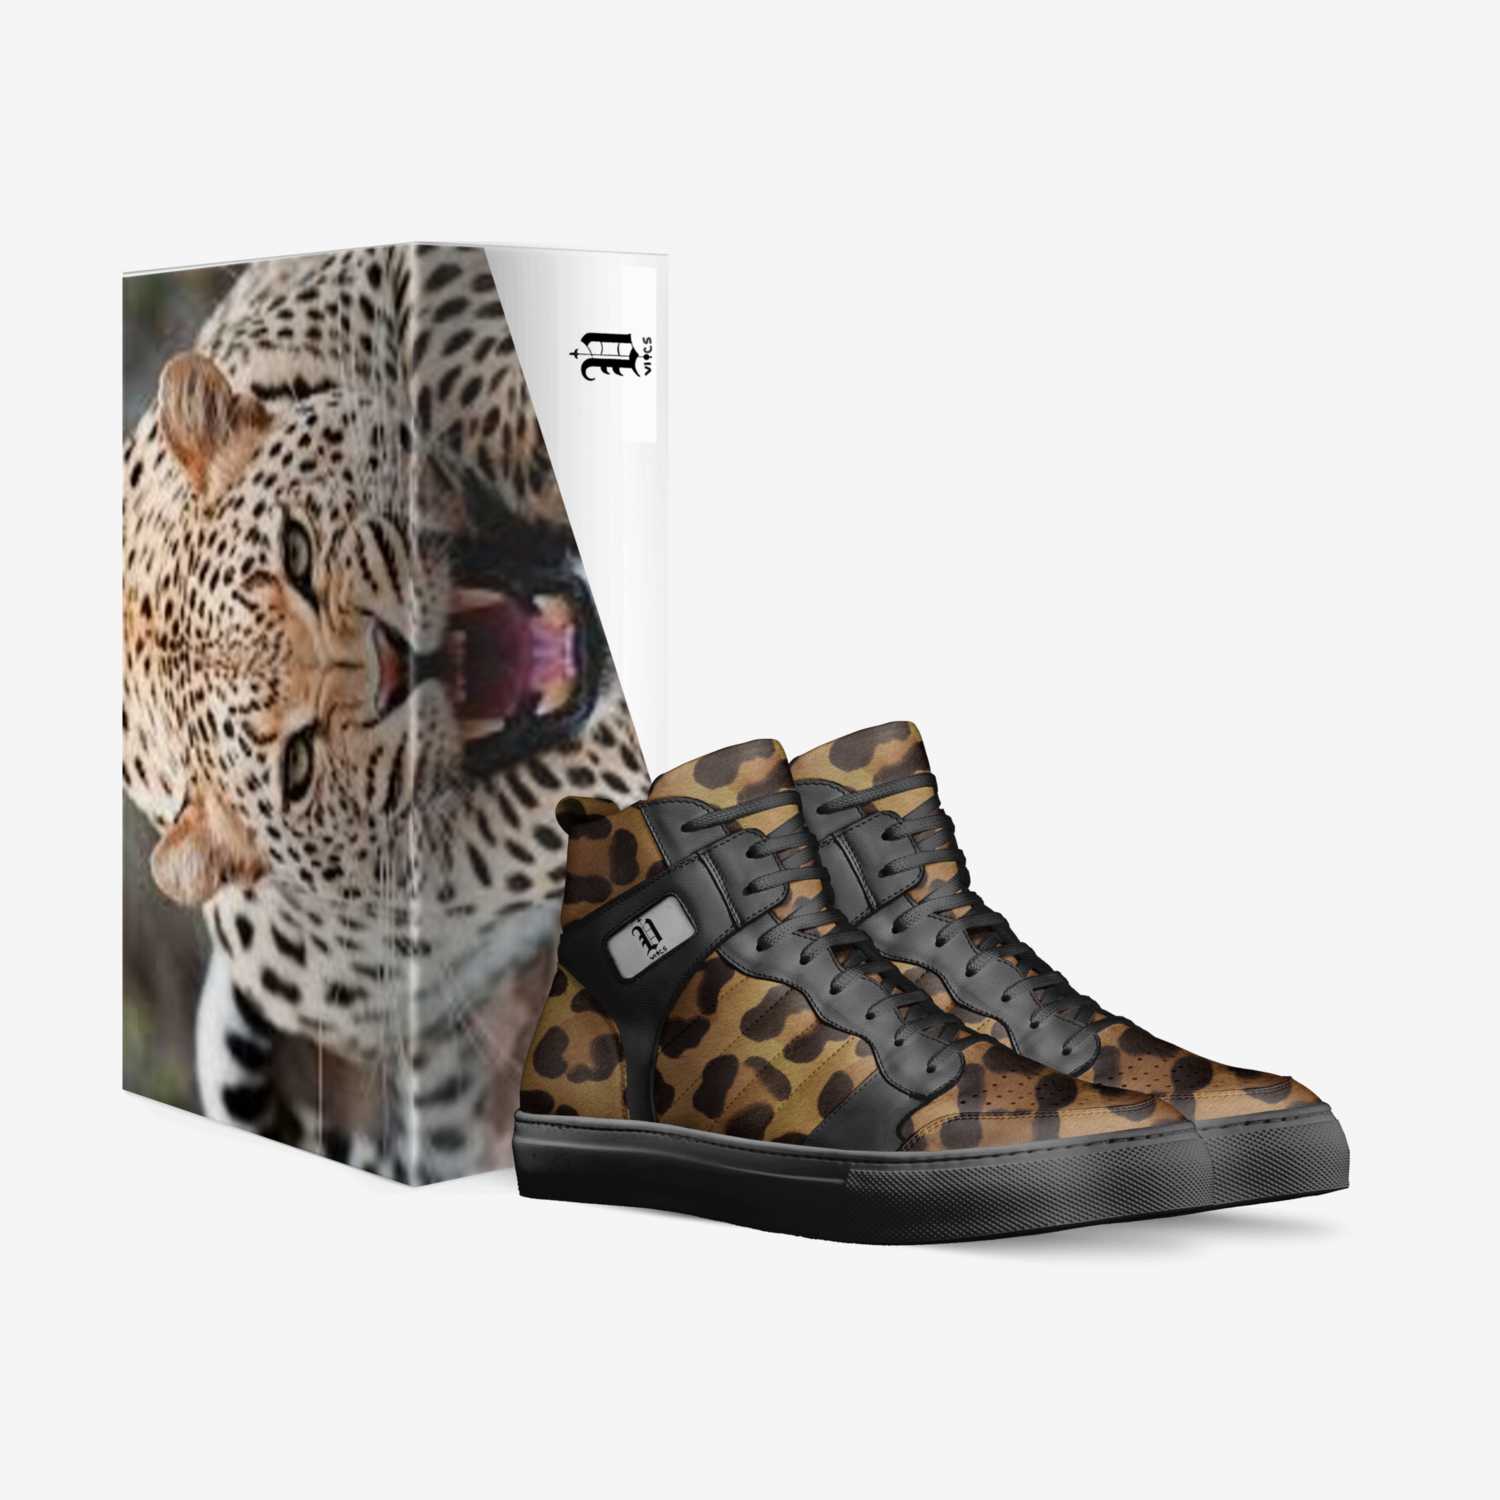 Vics jaguar air custom made in Italy shoes by Brayden Murphy | Box view